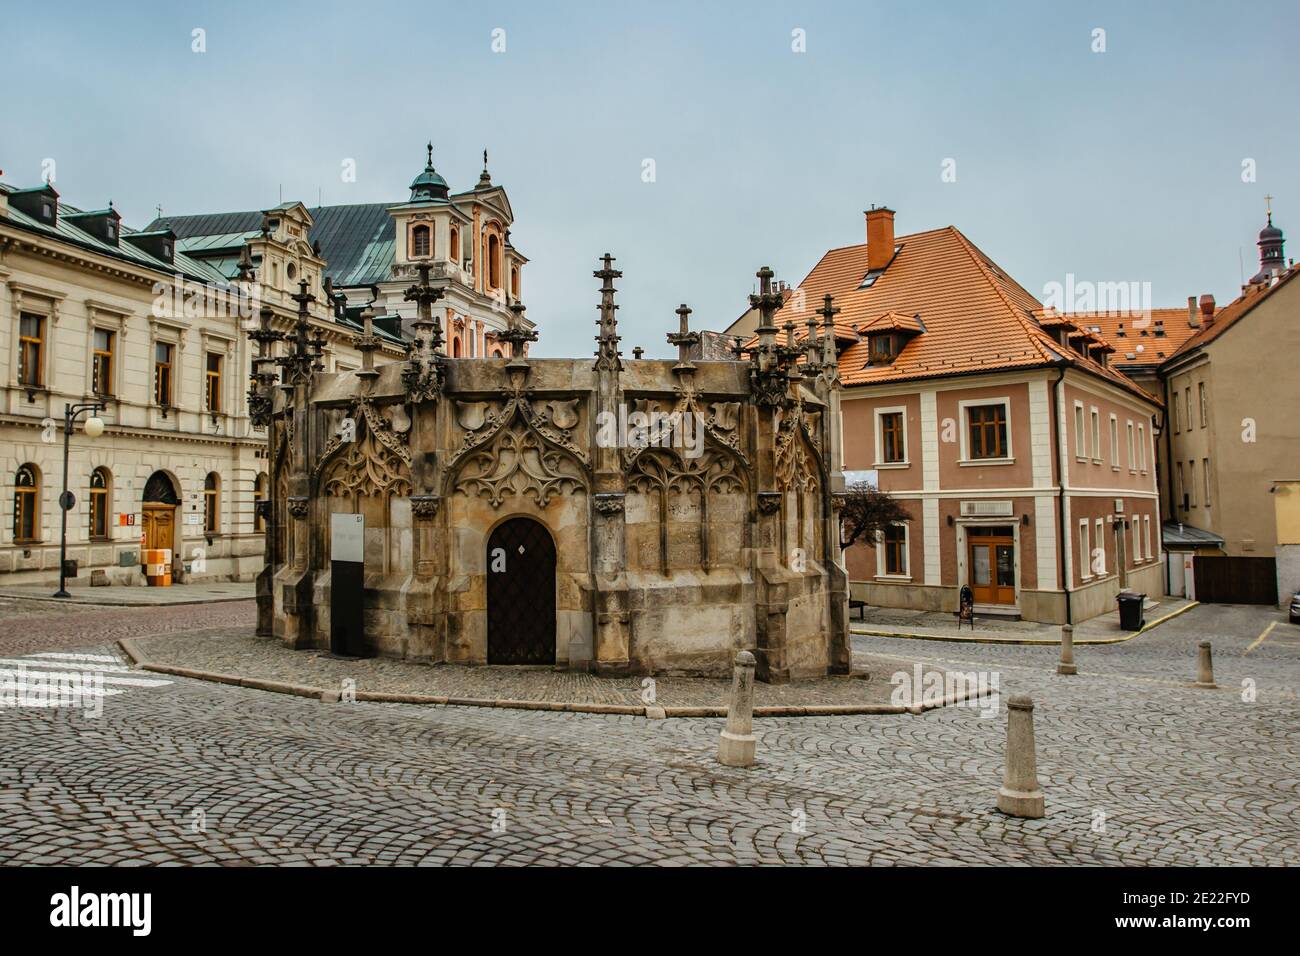 Stone Fountain in historical Town Center with cobblestone street, colorful facades, Kutna Hora, Czech Republic.UNESCO world heritage site. Stock Photo